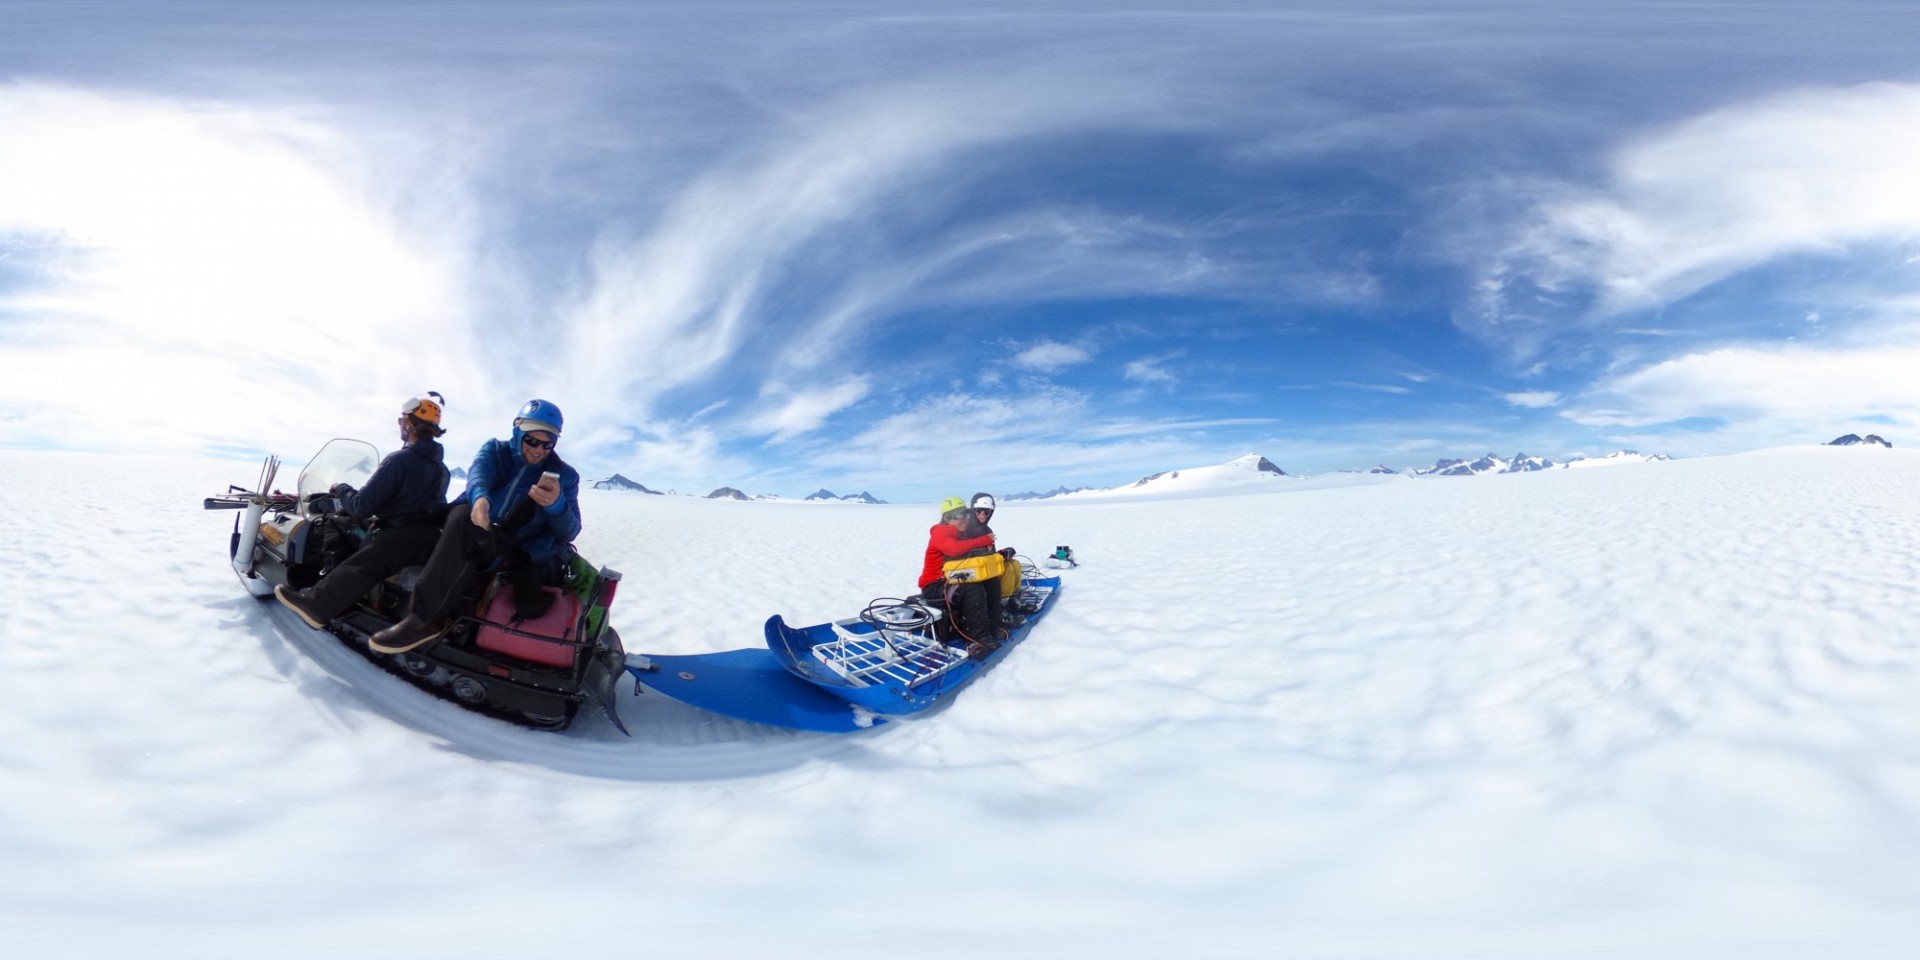 Ski-Doo Packed with Gear on Research Expedition in Juneau Alaska Using Radar to Measure How Quickly Snow Turns to Ice  - Jonny Kingslake & Elizabeth Case